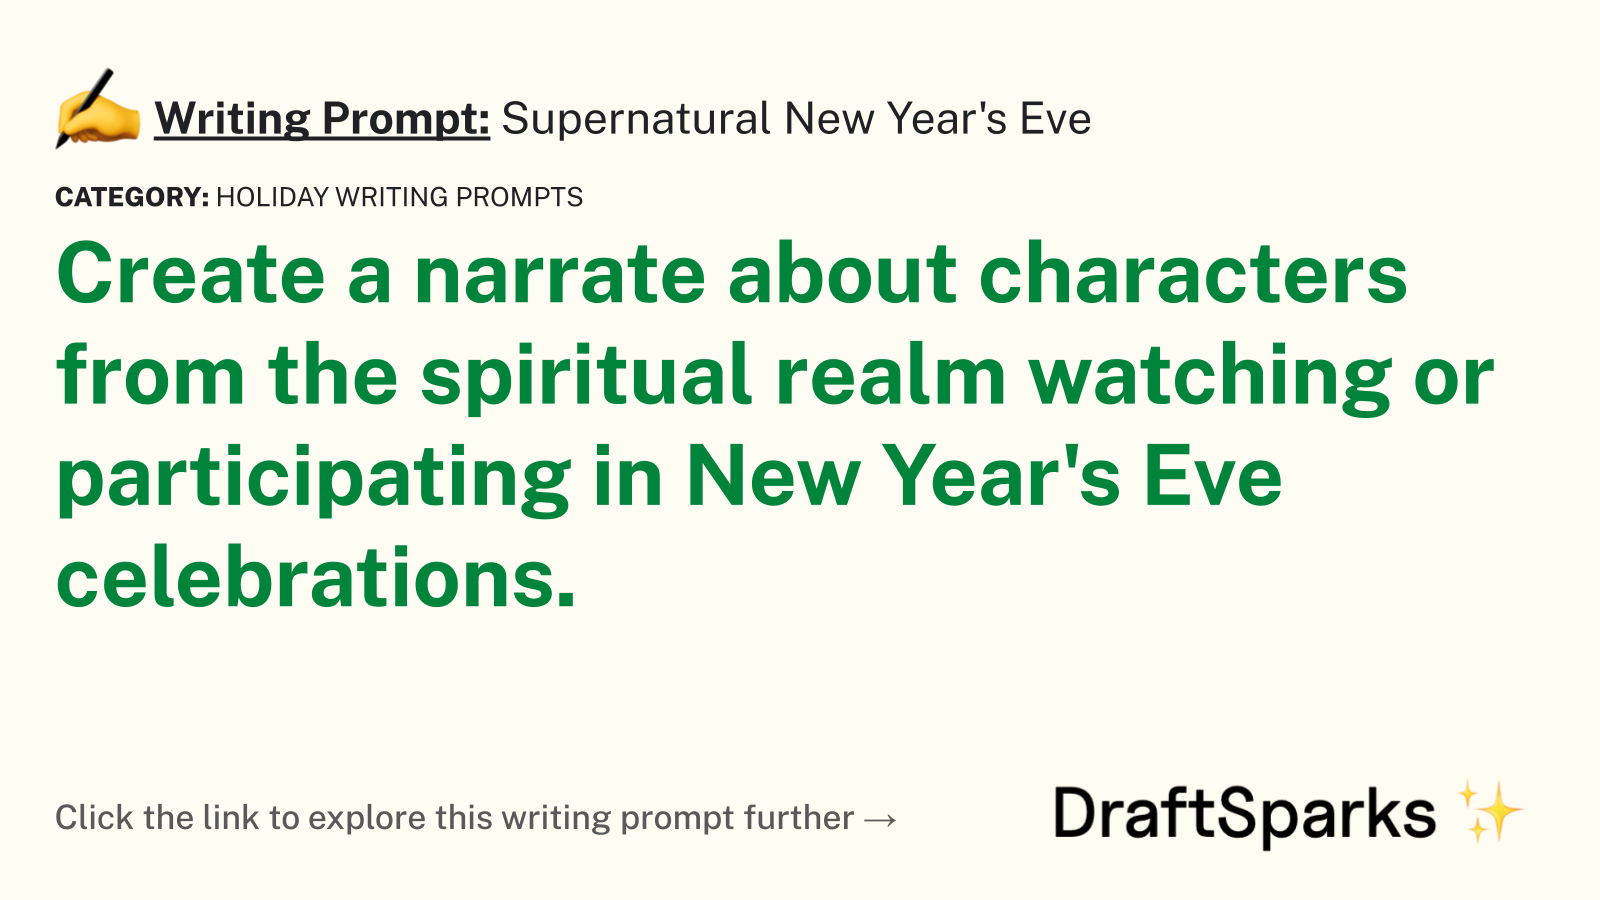 Supernatural New Year’s Eve